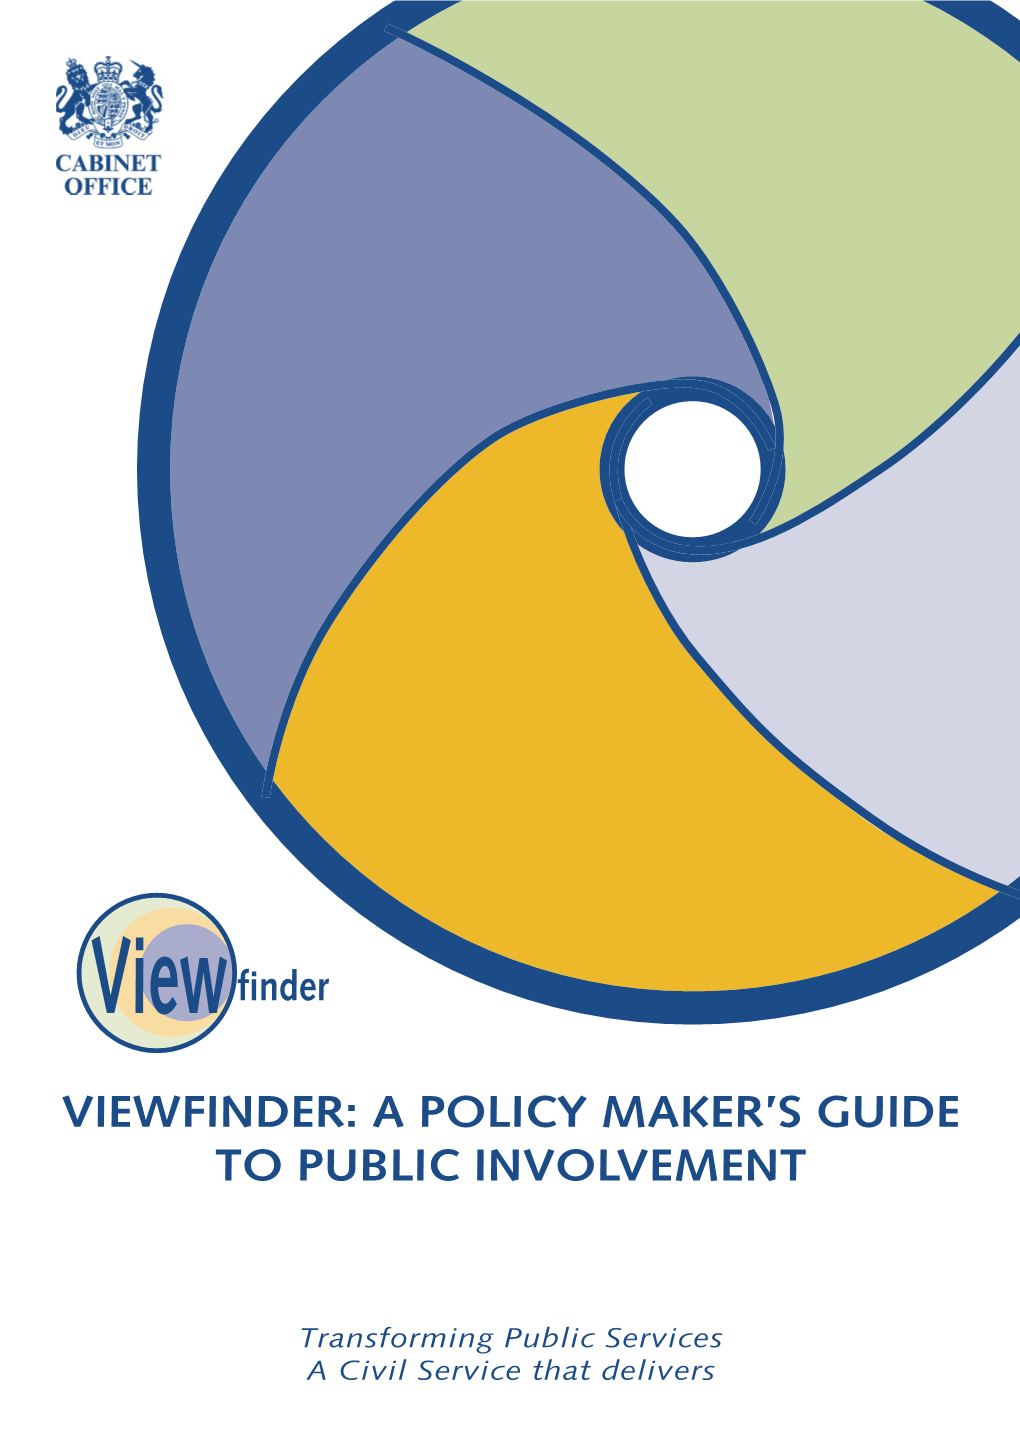 Viewfinder: a Policy Maker's Guide to Public Involvement